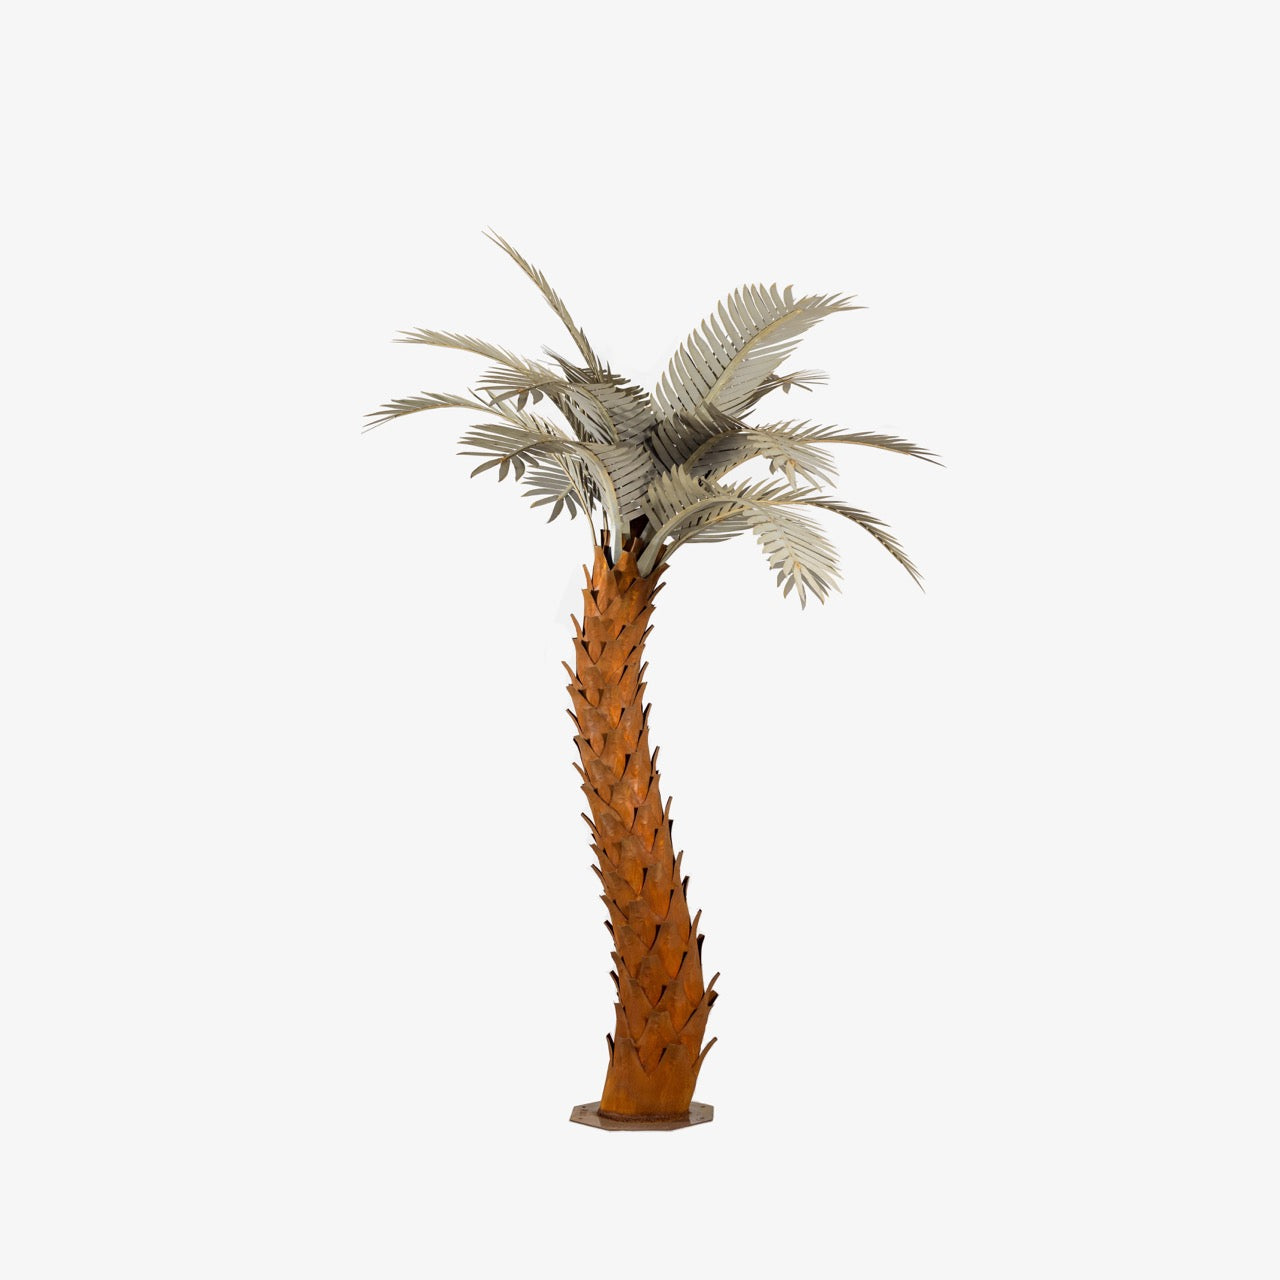 A large metal sunset palm tree, standing 12ft tall, against a white background. The sculpture's intricate design features realistic palm fronds and textured trunk, creating a lifelike appearance.